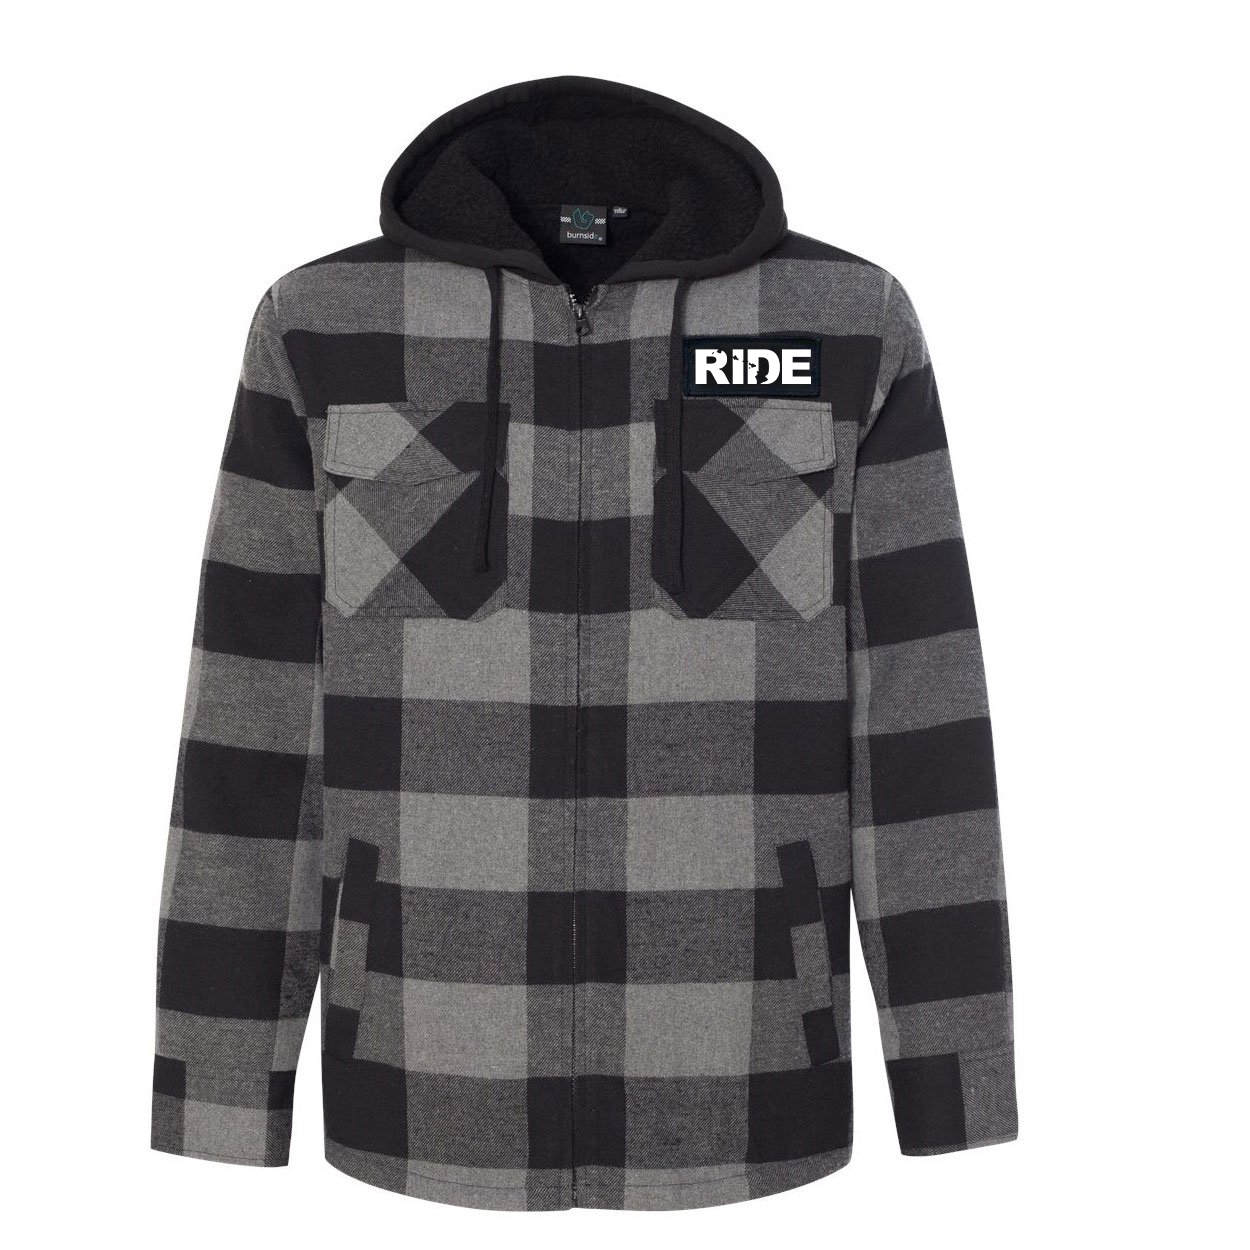 Ride Hawaii Classic Unisex Full Zip Woven Patch Hooded Flannel Jacket Black/Gray (White Logo)